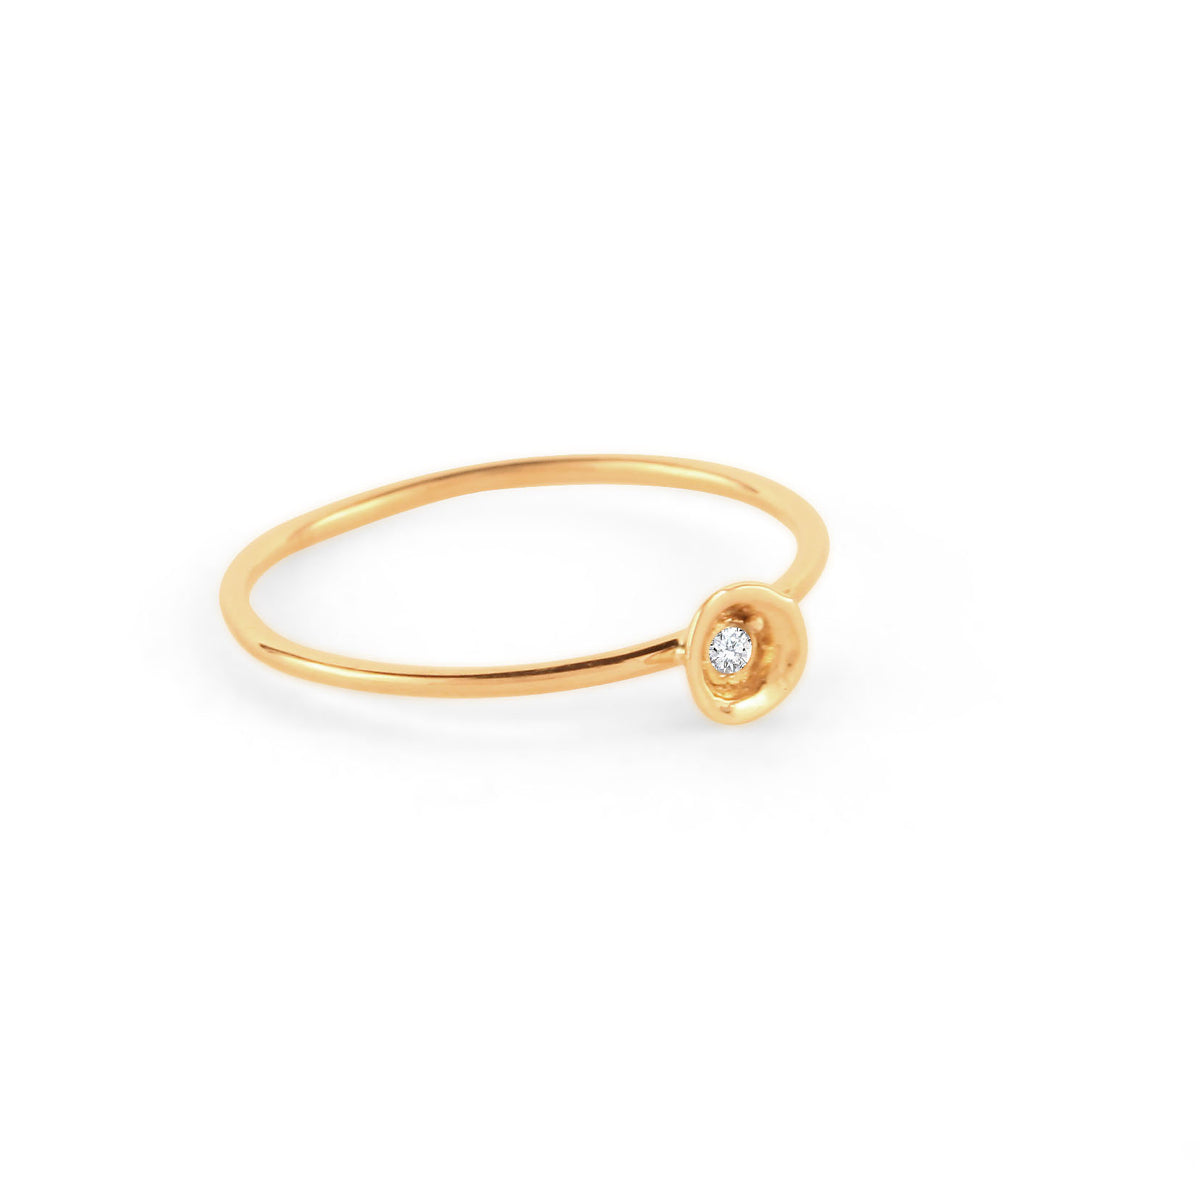 WD14 - The Rose Bud Ring